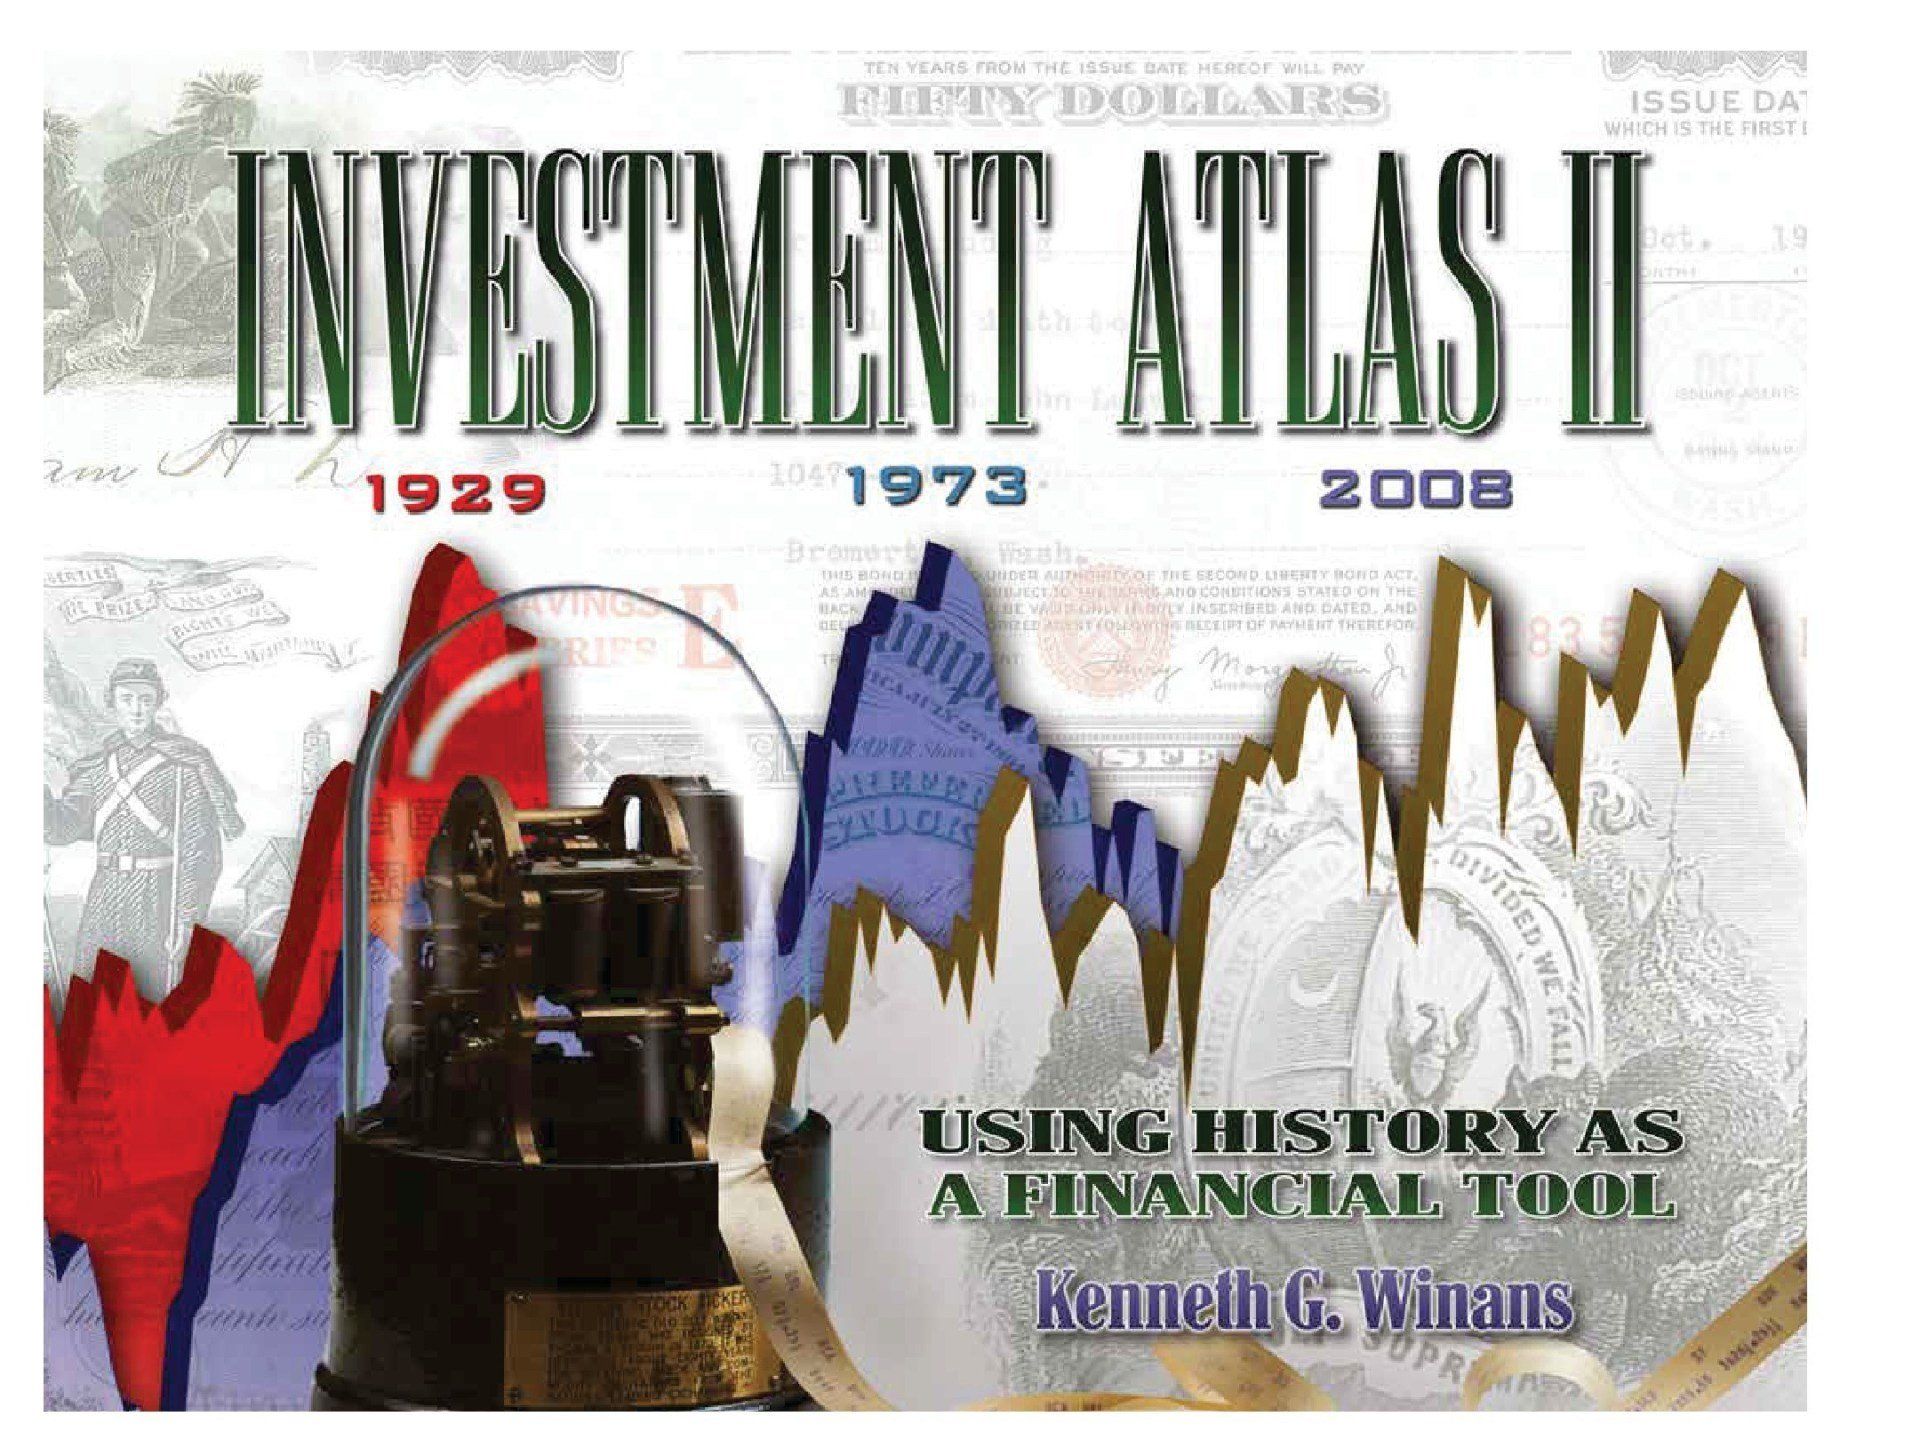 First Investment book sent into space: Investment Atlas II by Ken Winans sets world record